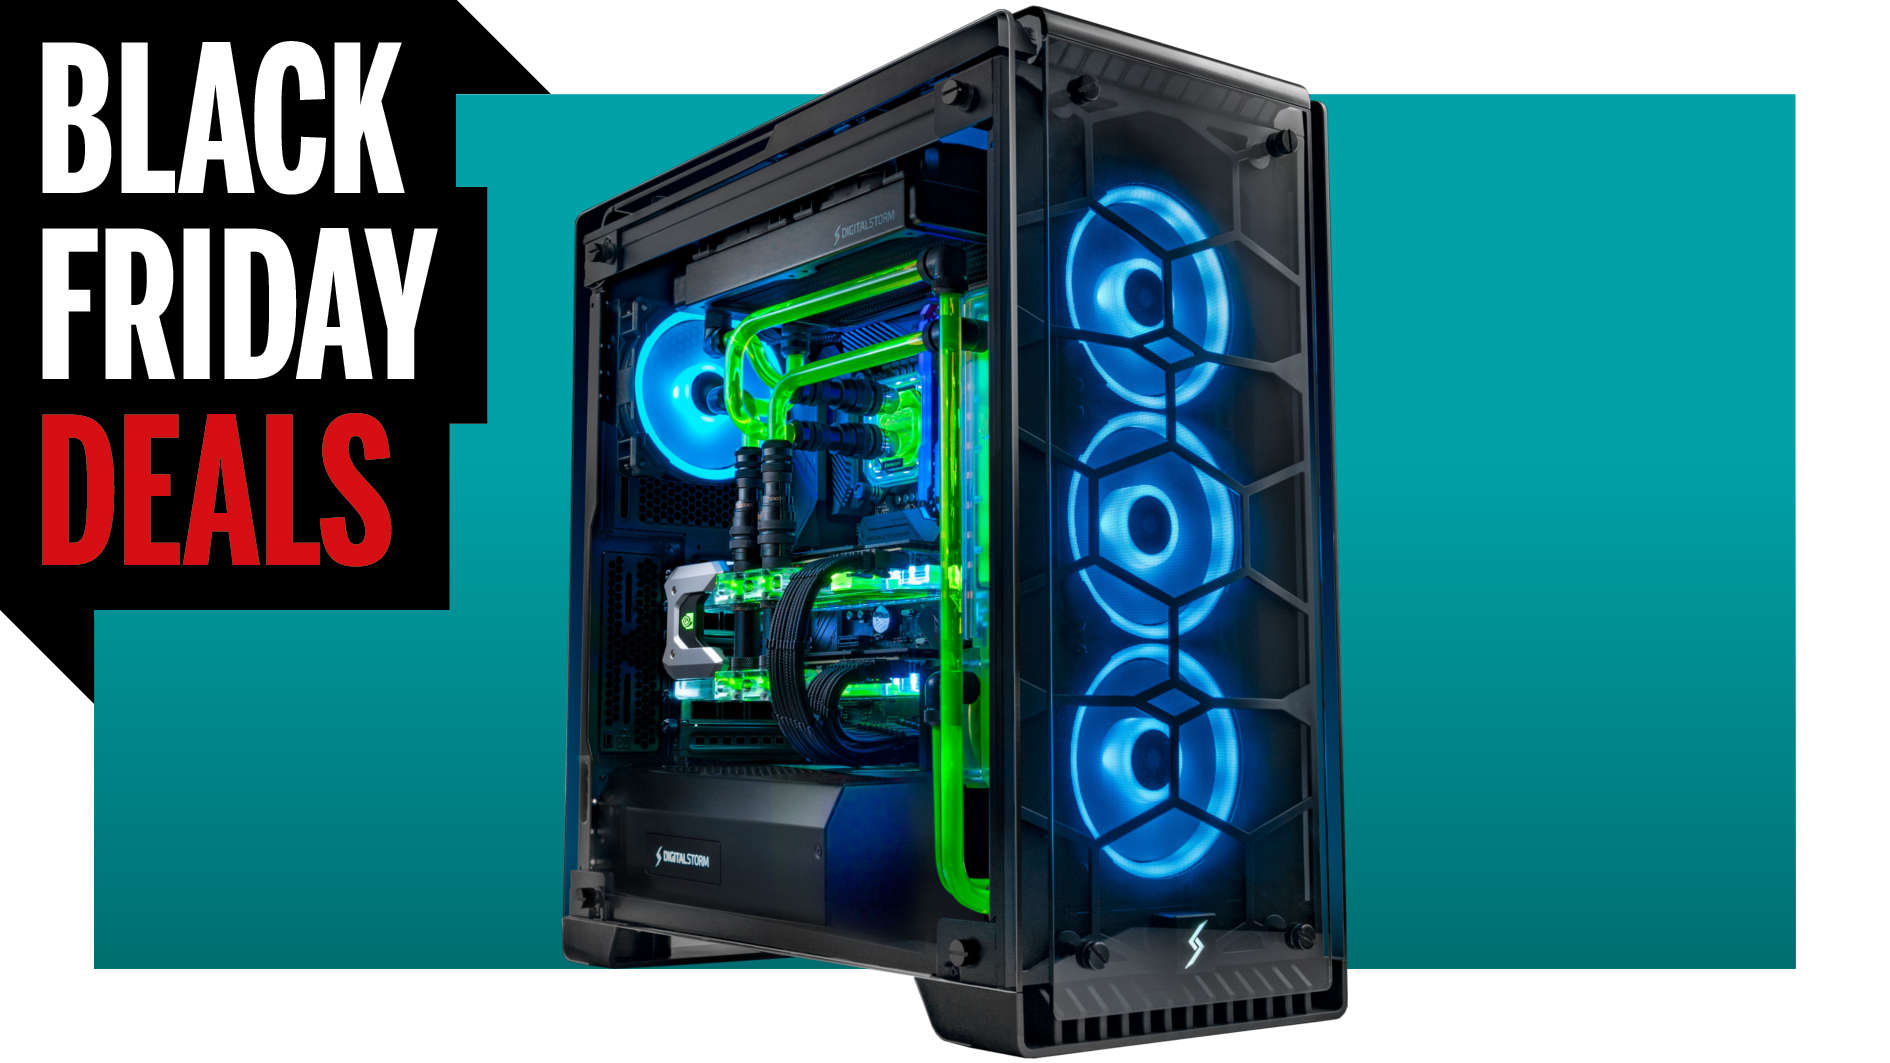 Black Friday Gaming PC deals 2021: the best prebuilt systems on sale today